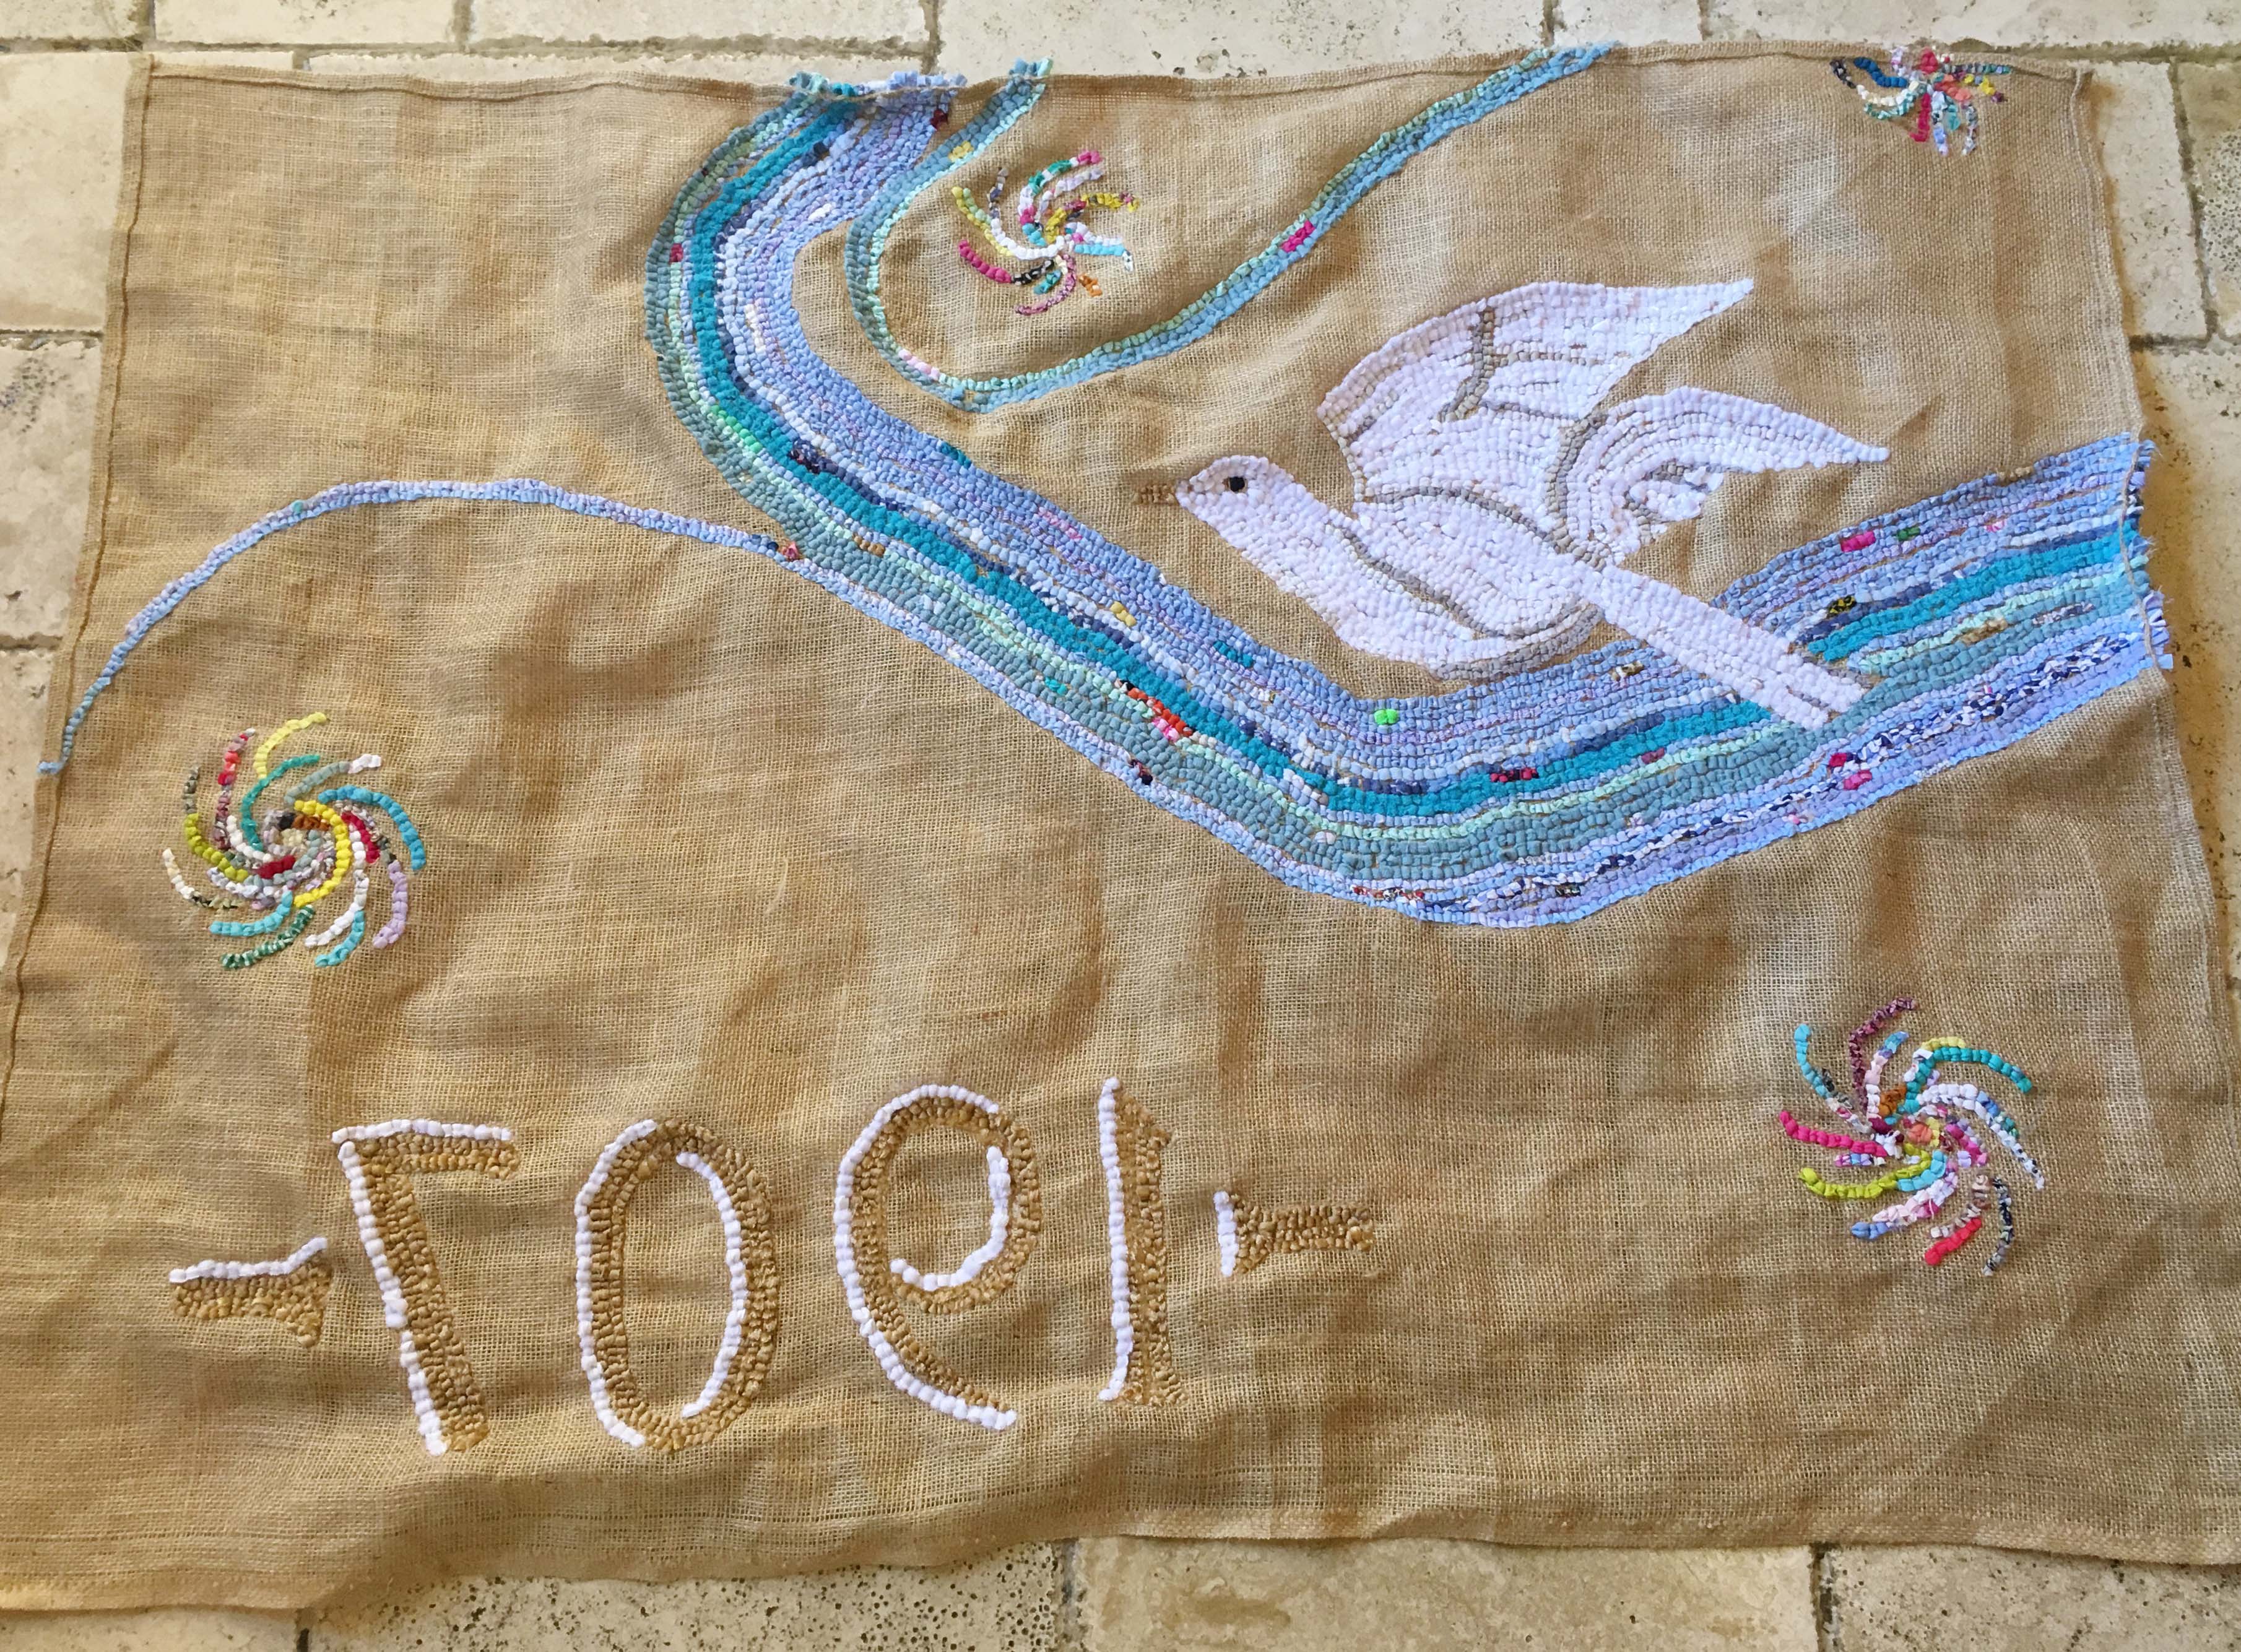 The Back of the Rag Rug Wall Hanging showing the details